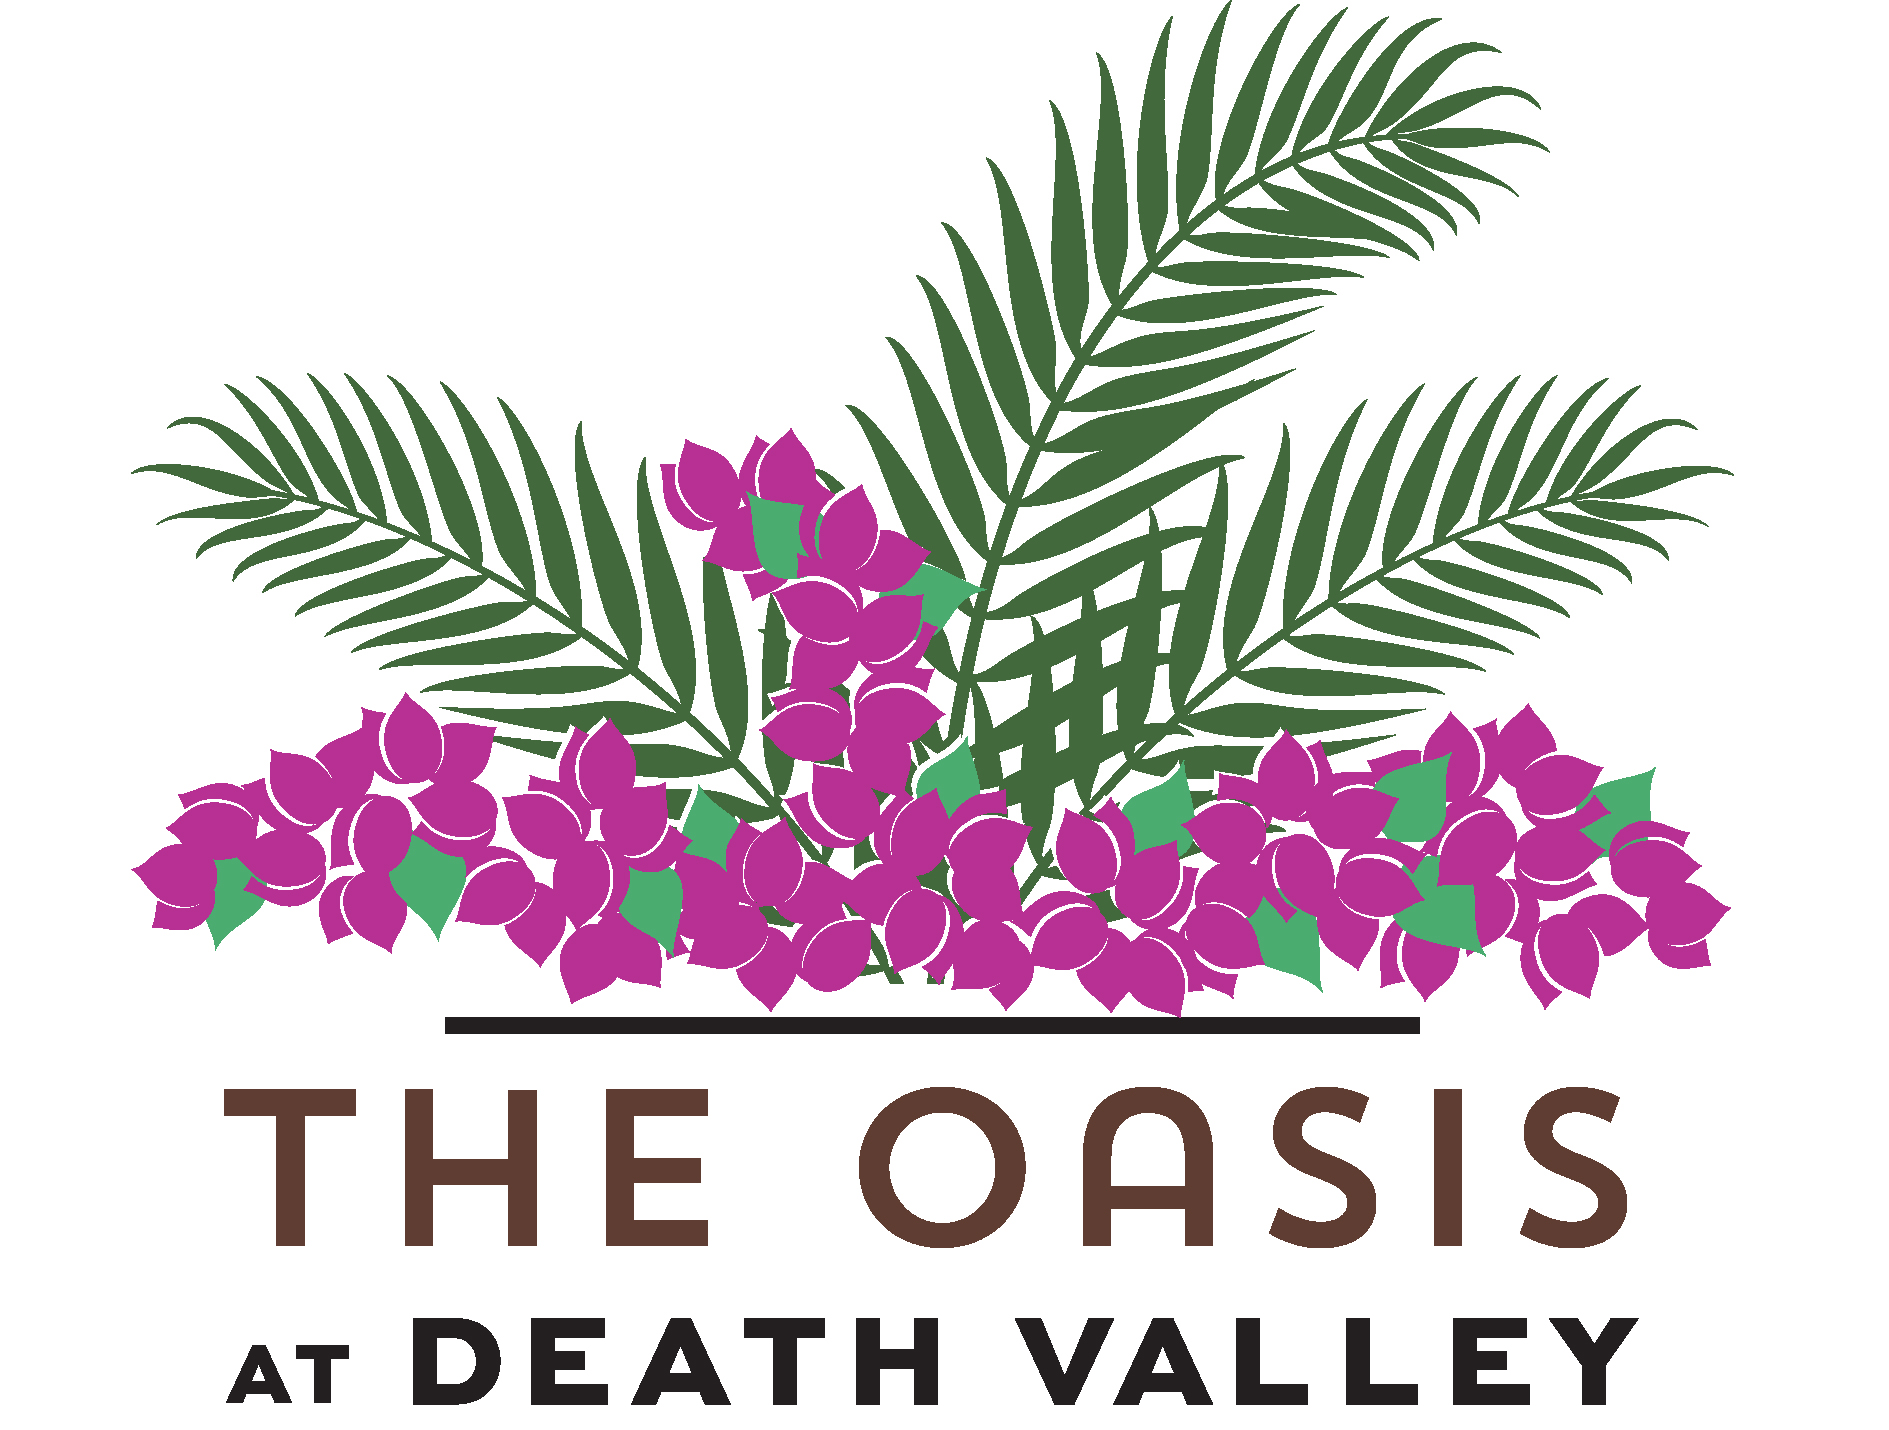 The Oasis at Death Valley